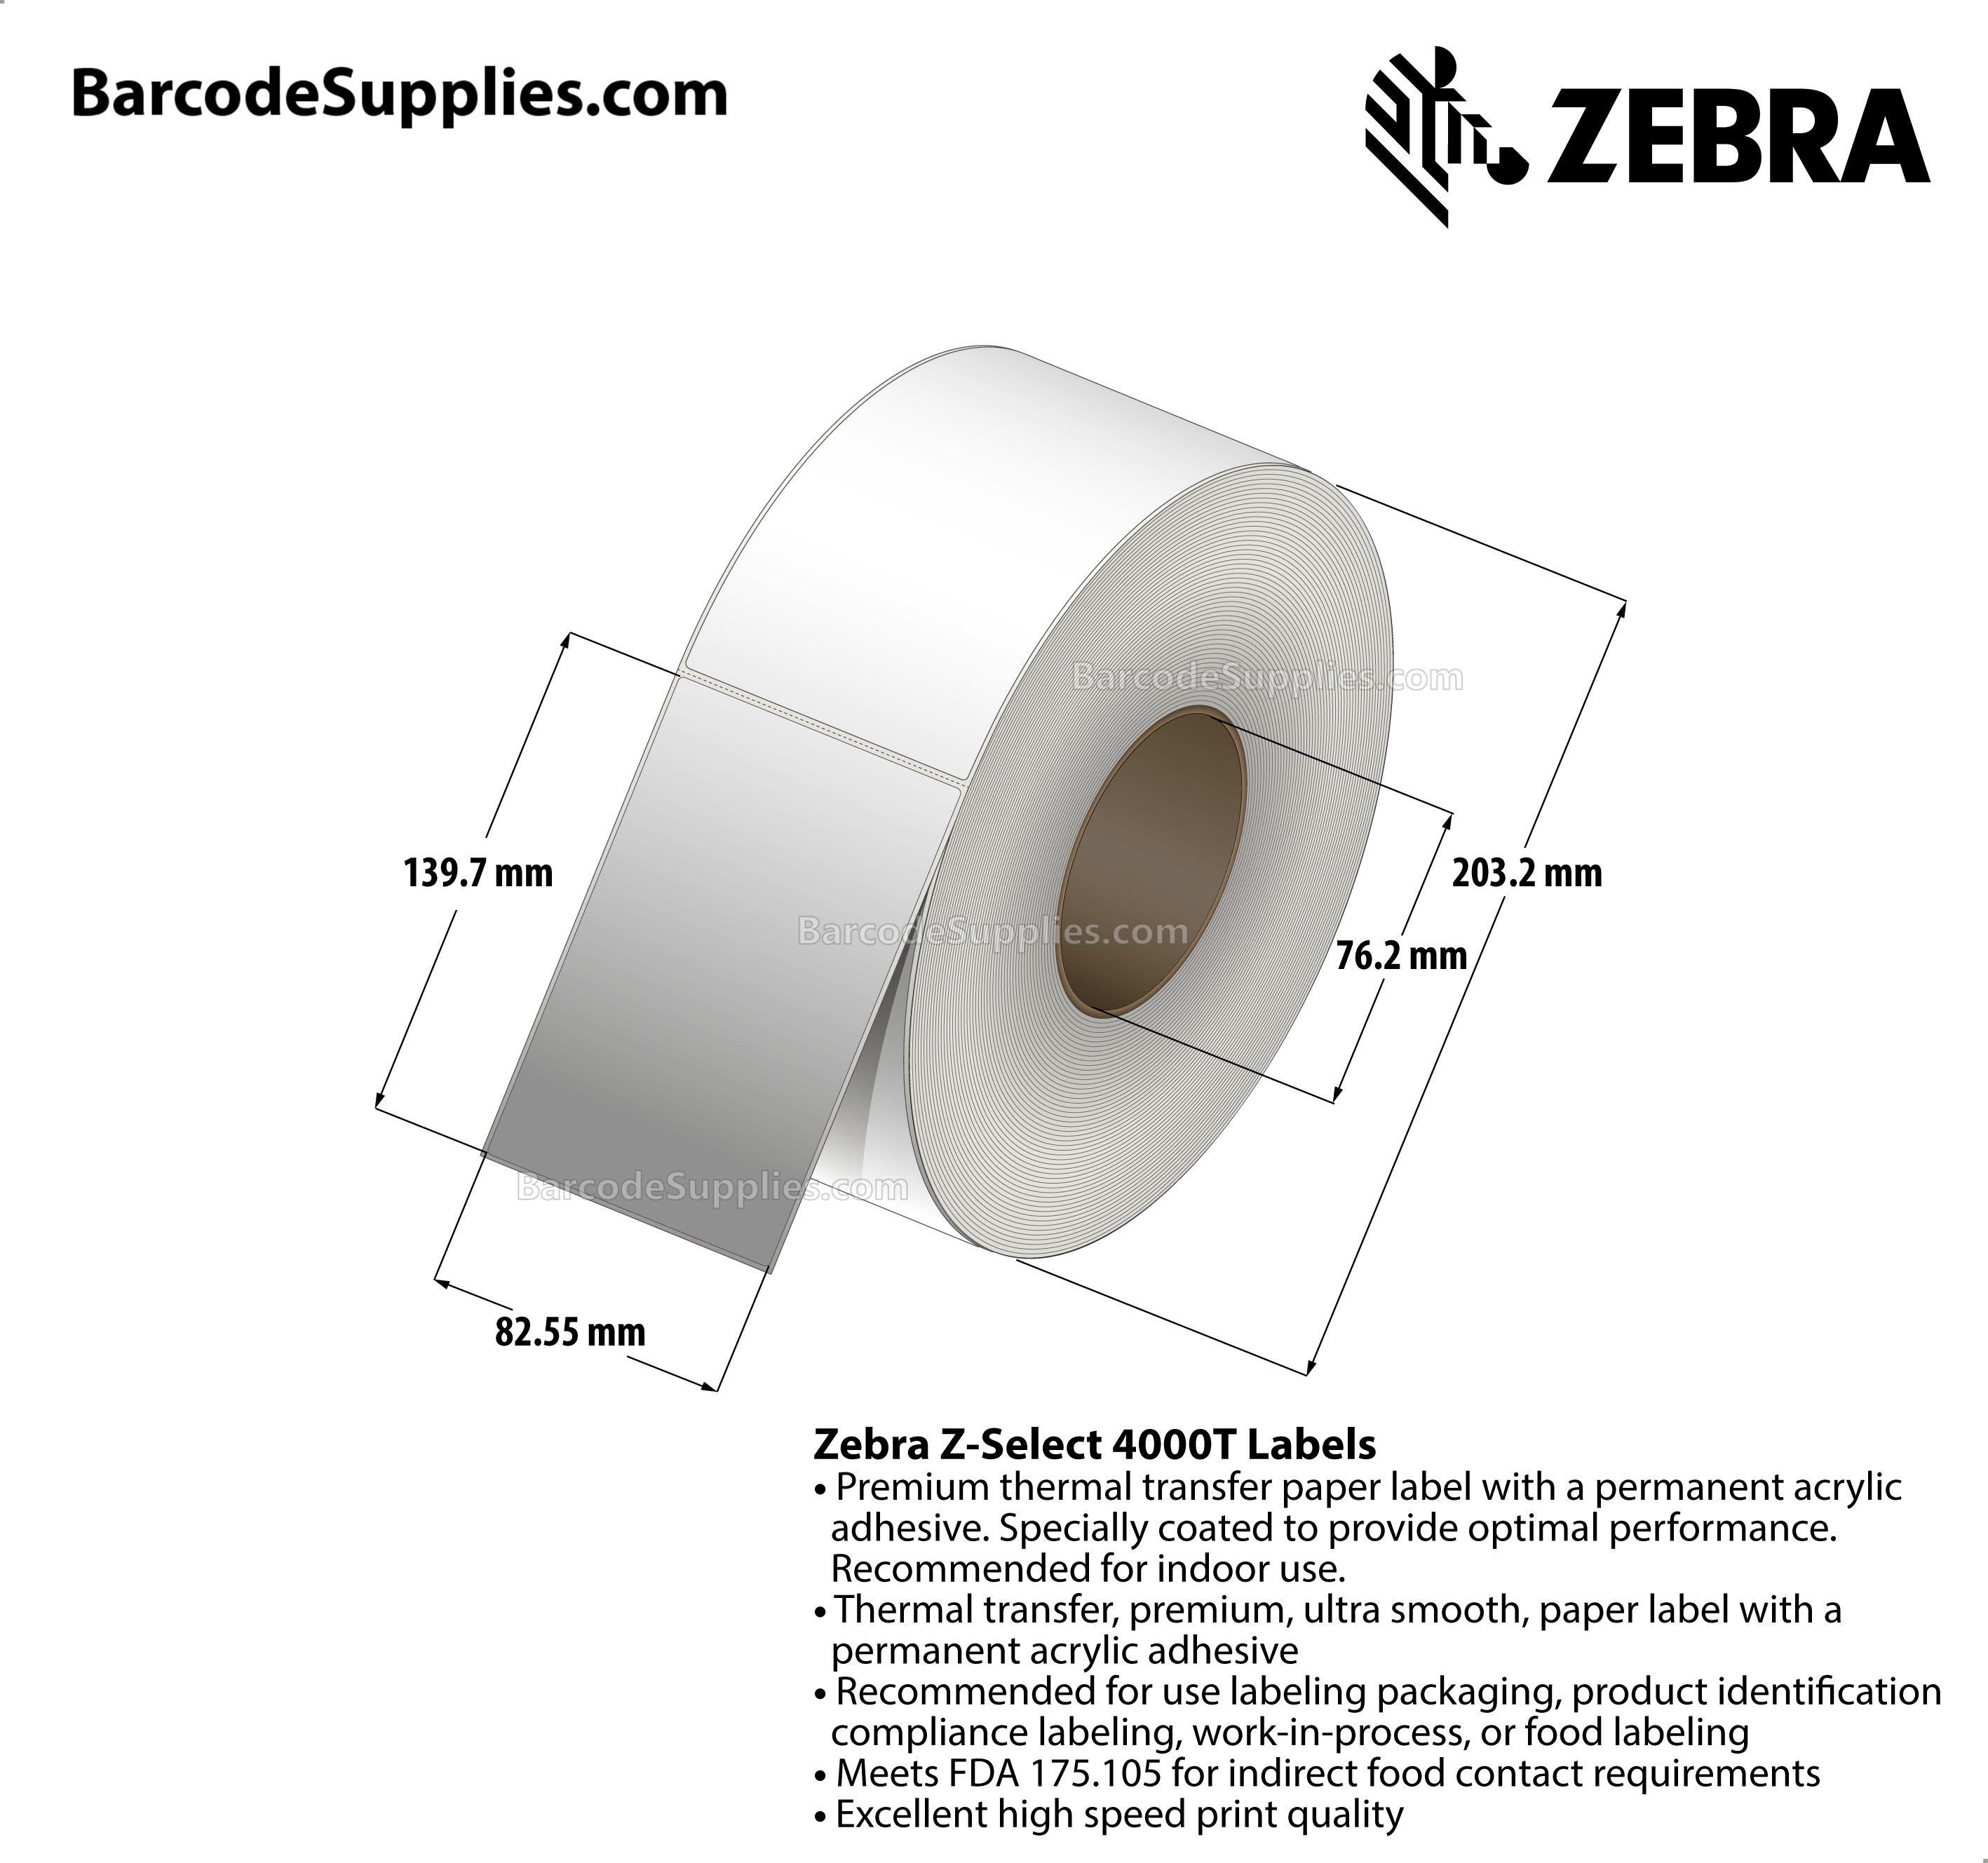 3.25 x 5.5 Thermal Transfer White Z-Select 4000T Labels With Permanent Adhesive - Not Perforated - 1040 Labels Per Roll - Carton Of 6 Rolls - 6240 Labels Total - MPN: 72286